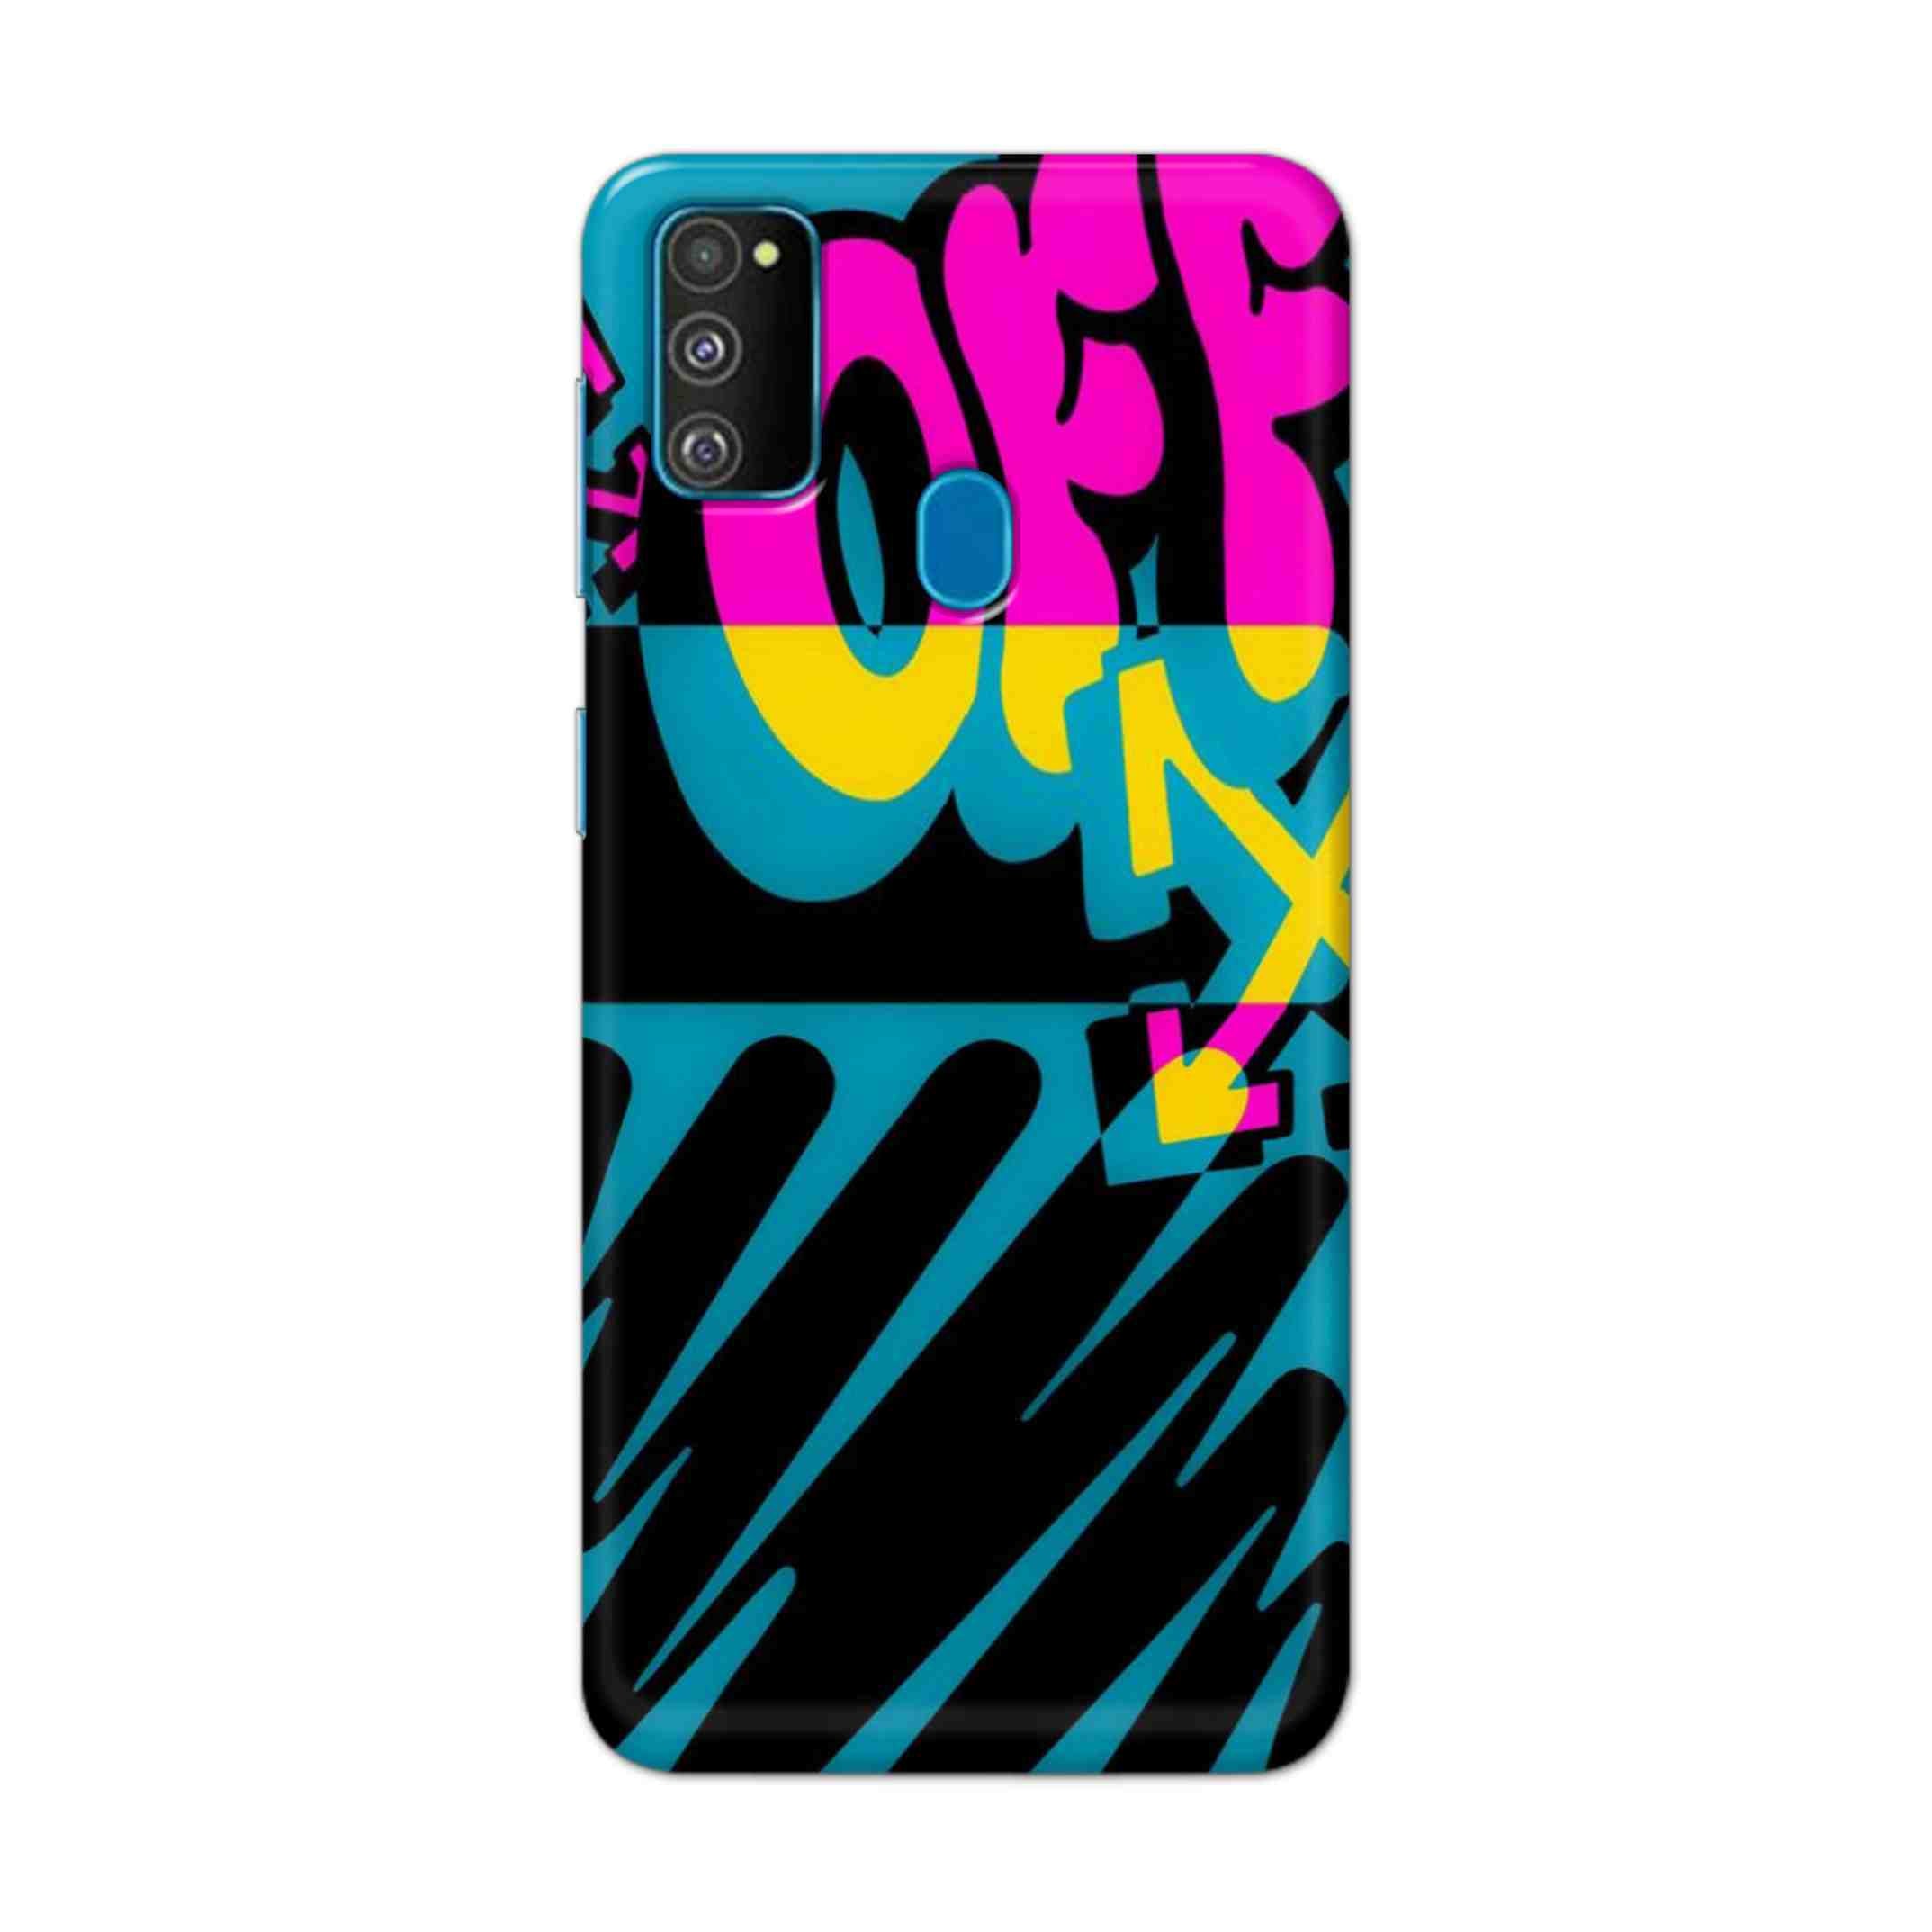 Buy Off Hard Back Mobile Phone Case Cover For Samsung Galaxy M30s Online